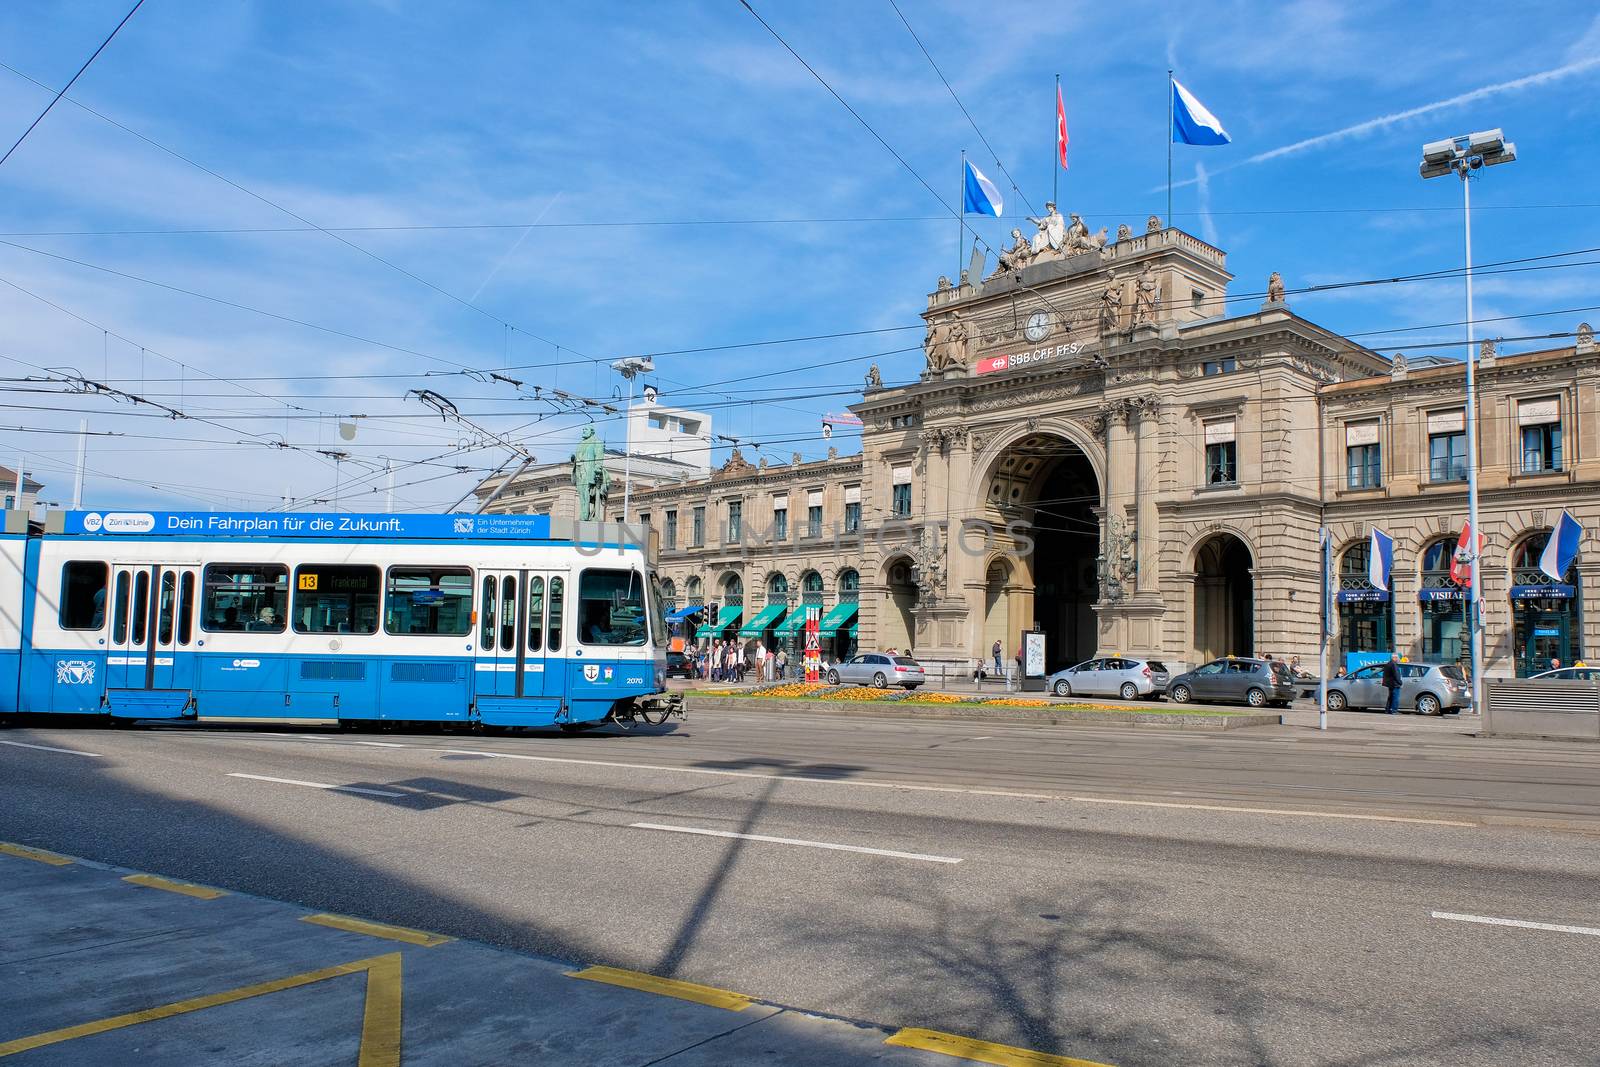 Zurich, Switzerland - 29 March : a tram passing along Bahnhofbrucke bridge in the city of Zurich. Trams make an important contribution to public transport of the city at 29 March 2017